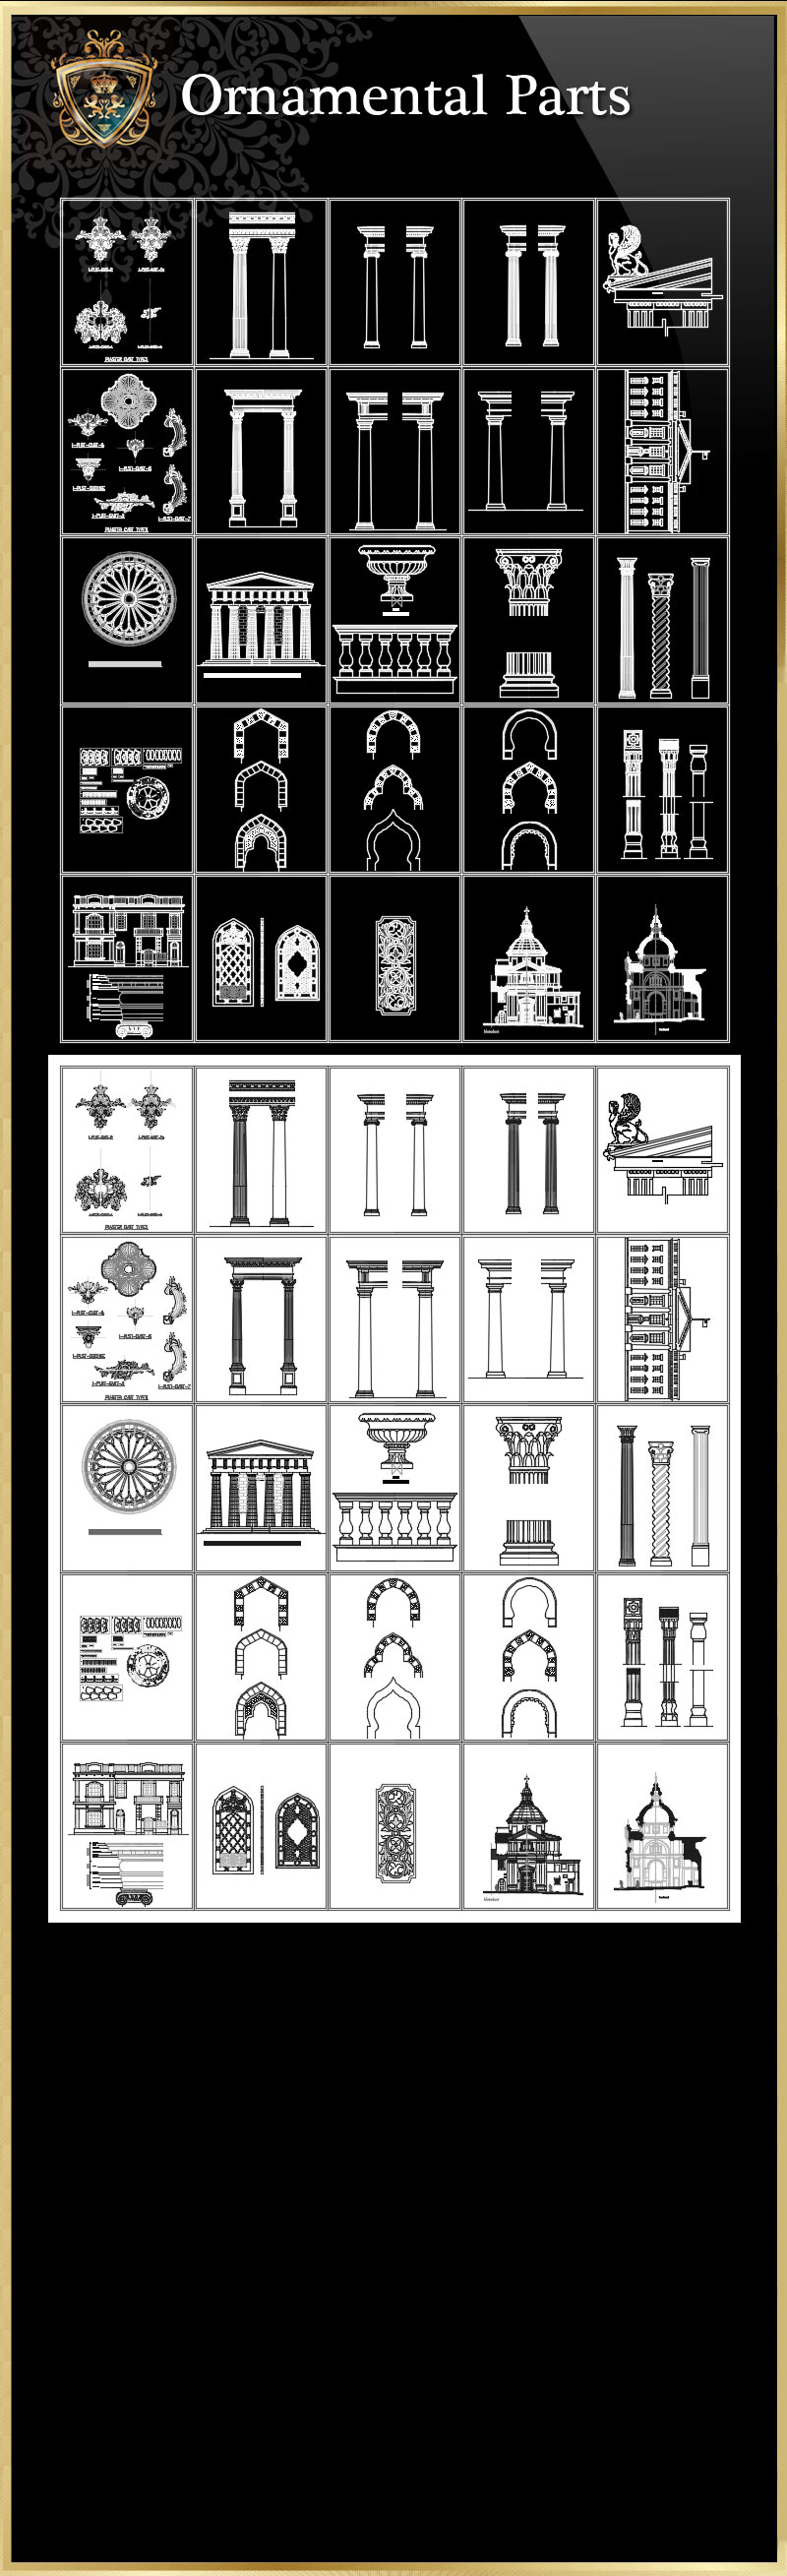 ★【Ornamental Parts of Buildings 2】Luxury home, Luxury Villas, Luxury Palace, Architecture Ornamental Parts, Decorative Inserts & Accessories, Handrail & Stairway Parts, Outdoor House Accessories, Euro Architectural Components, Arcade